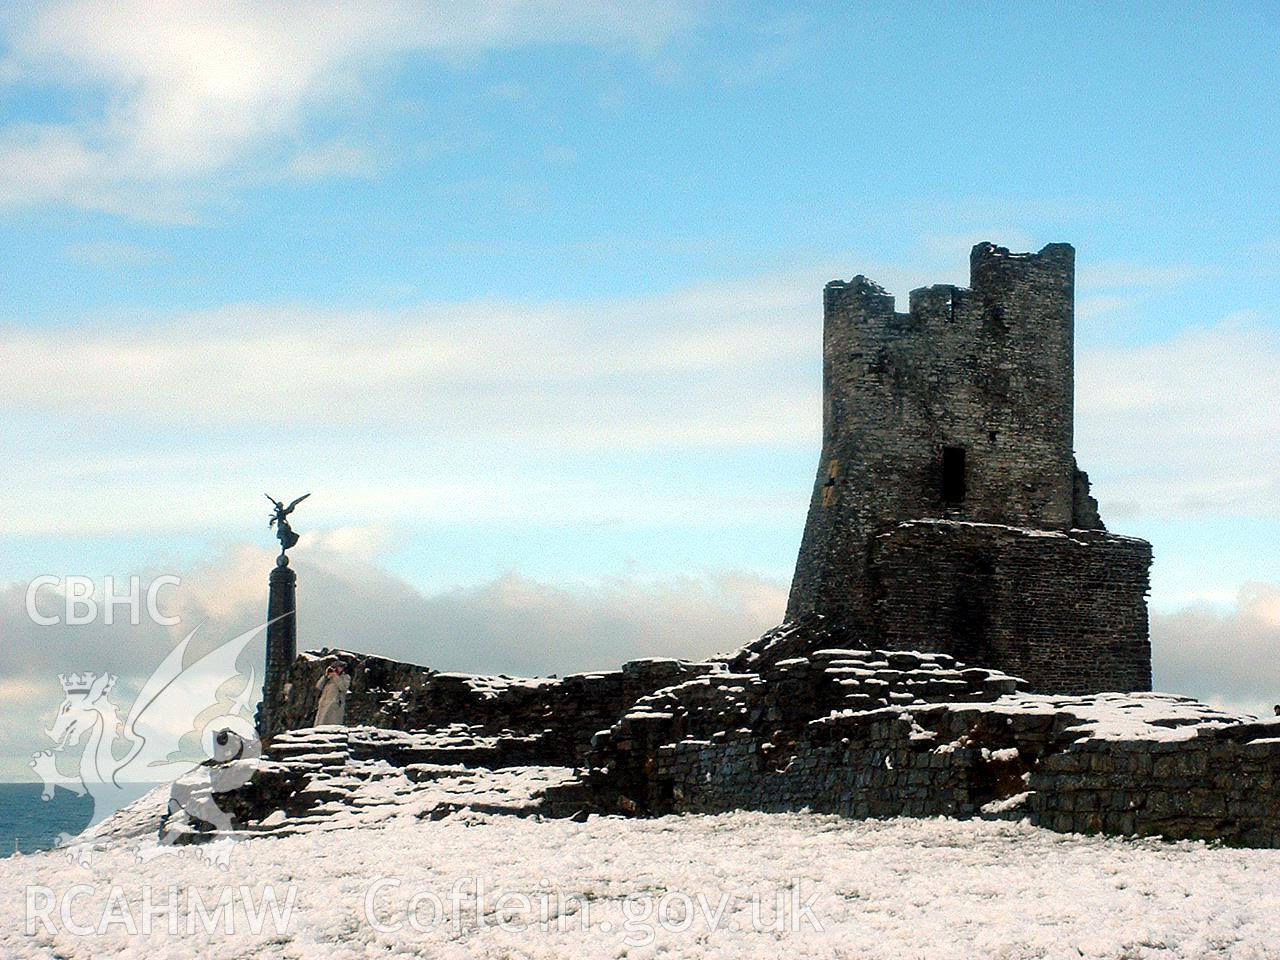 Digital colour photograph of Aberystwyth Castle, with war memorial, in snow, by Charles Green, 2004.